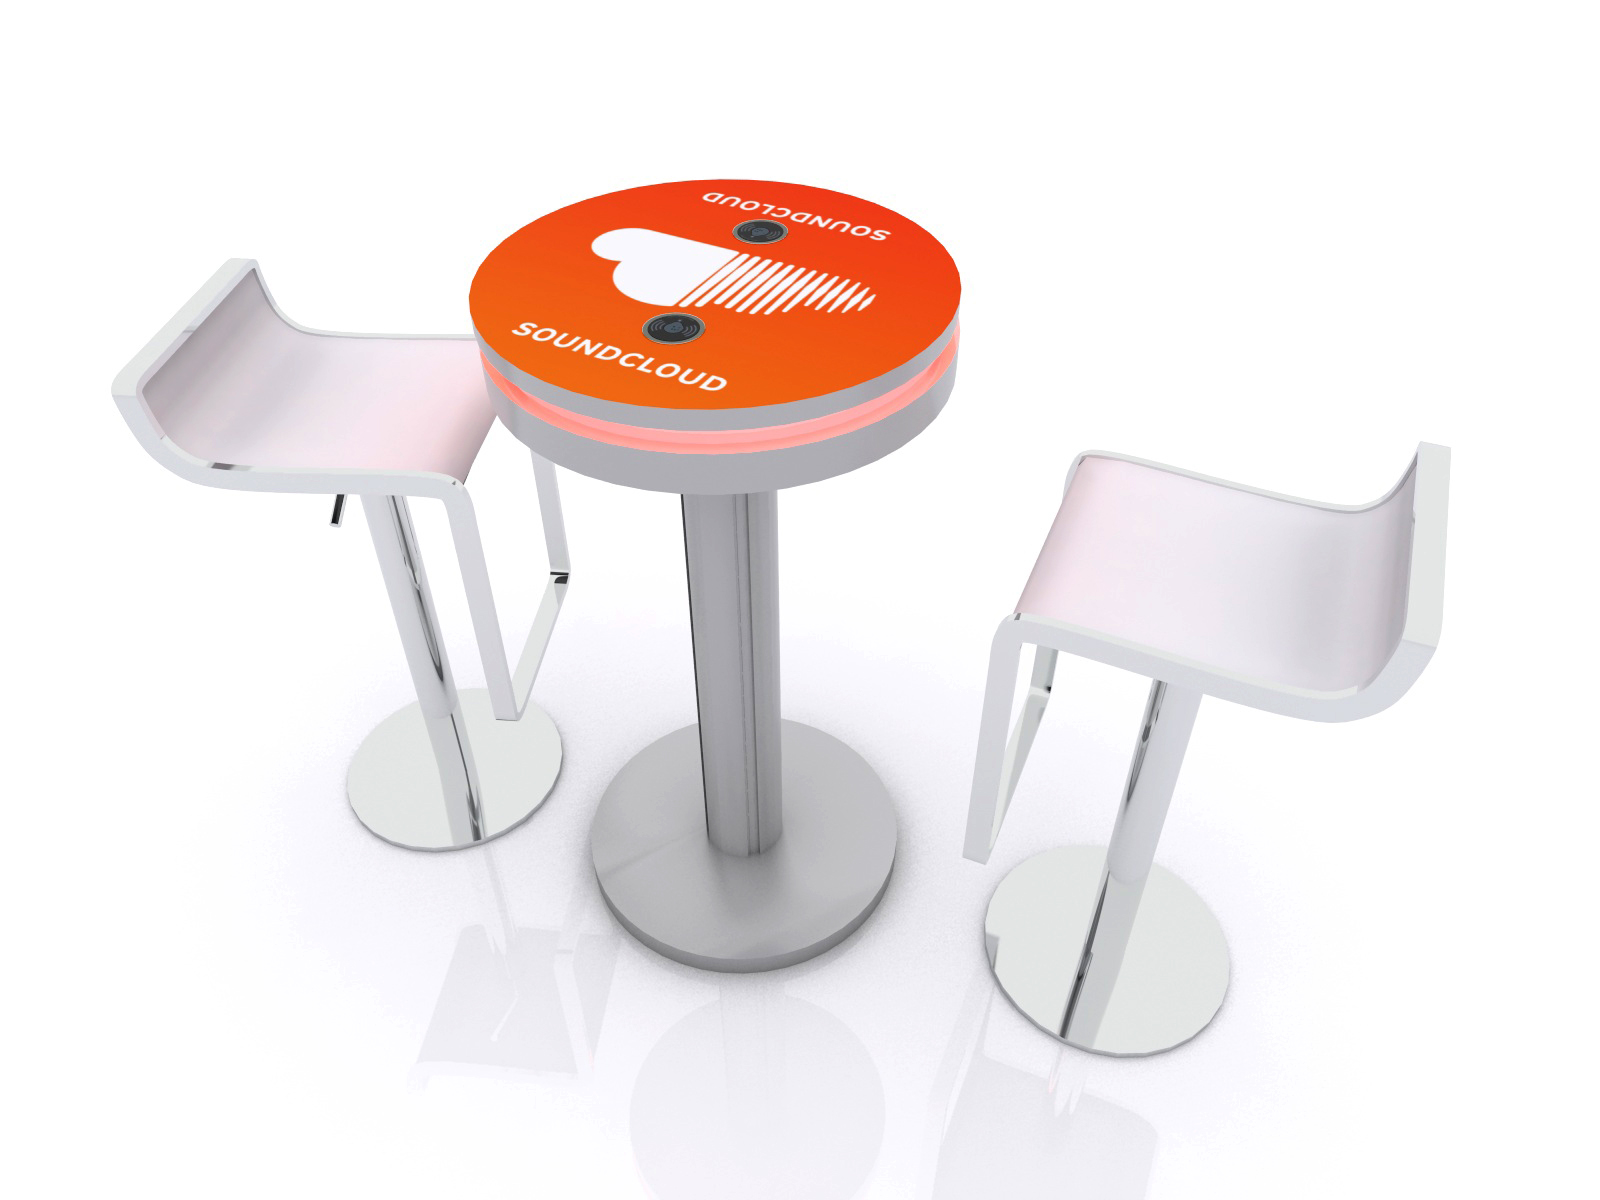 MOD-1462 Wireless Event Charging Station -- Image 3